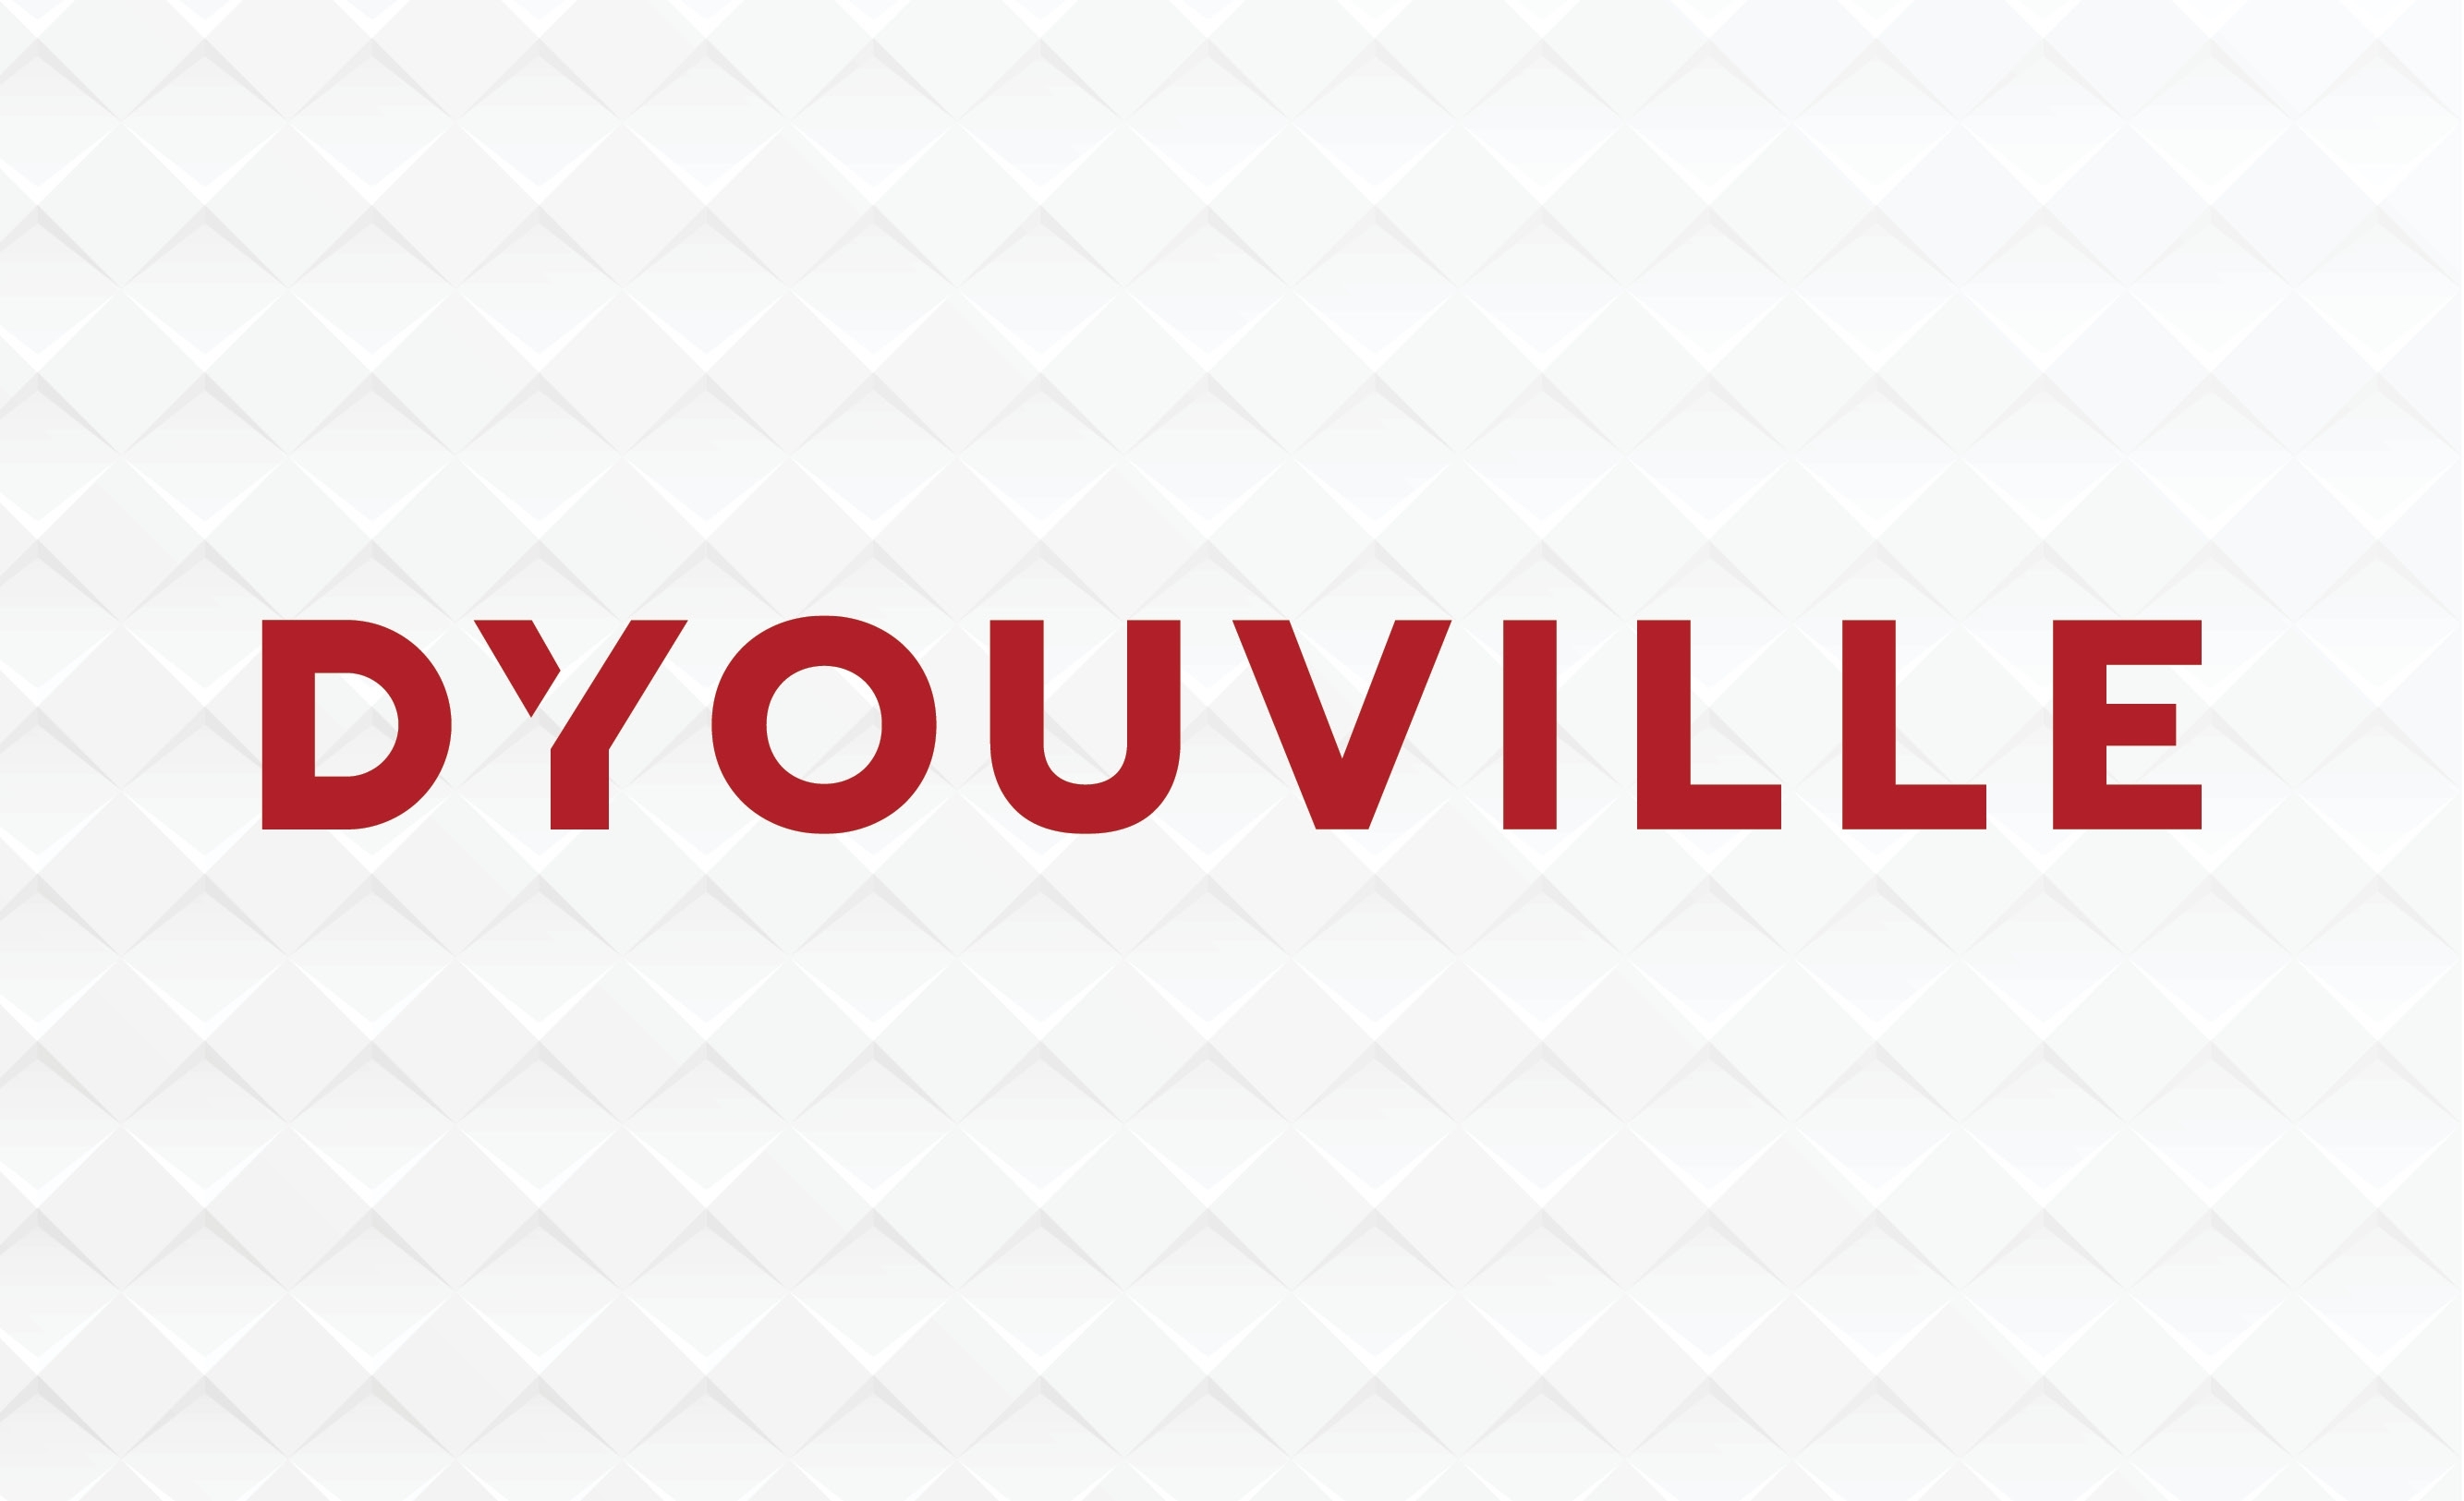 D'youville Launches New Brand | D'youville